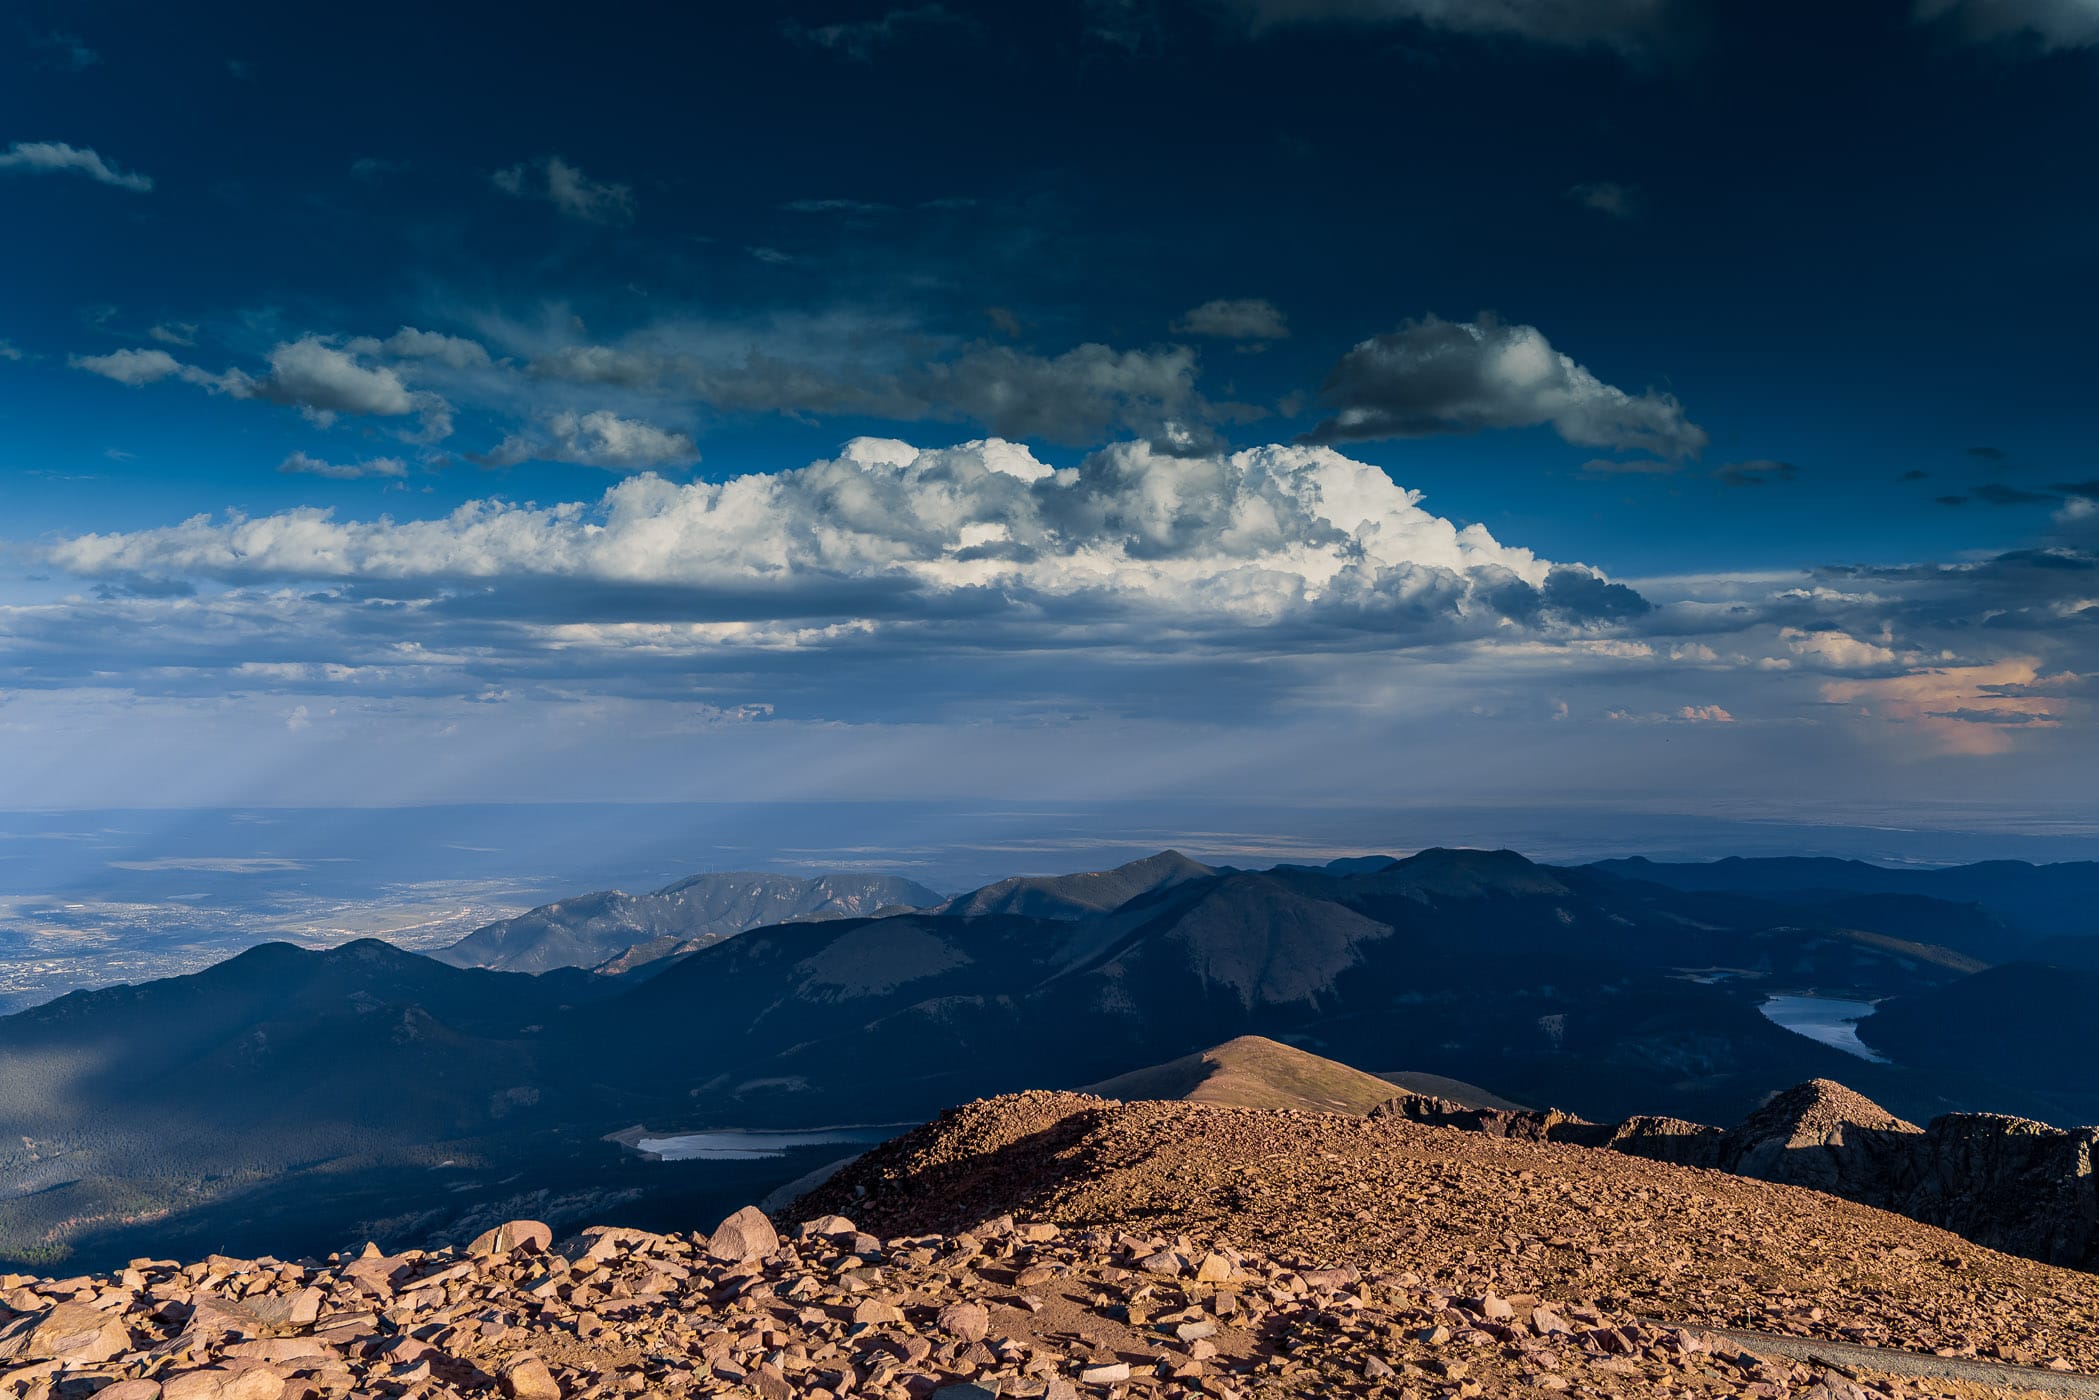 Colorado stretches to the distance as seen from the summit of Pikes Peak.